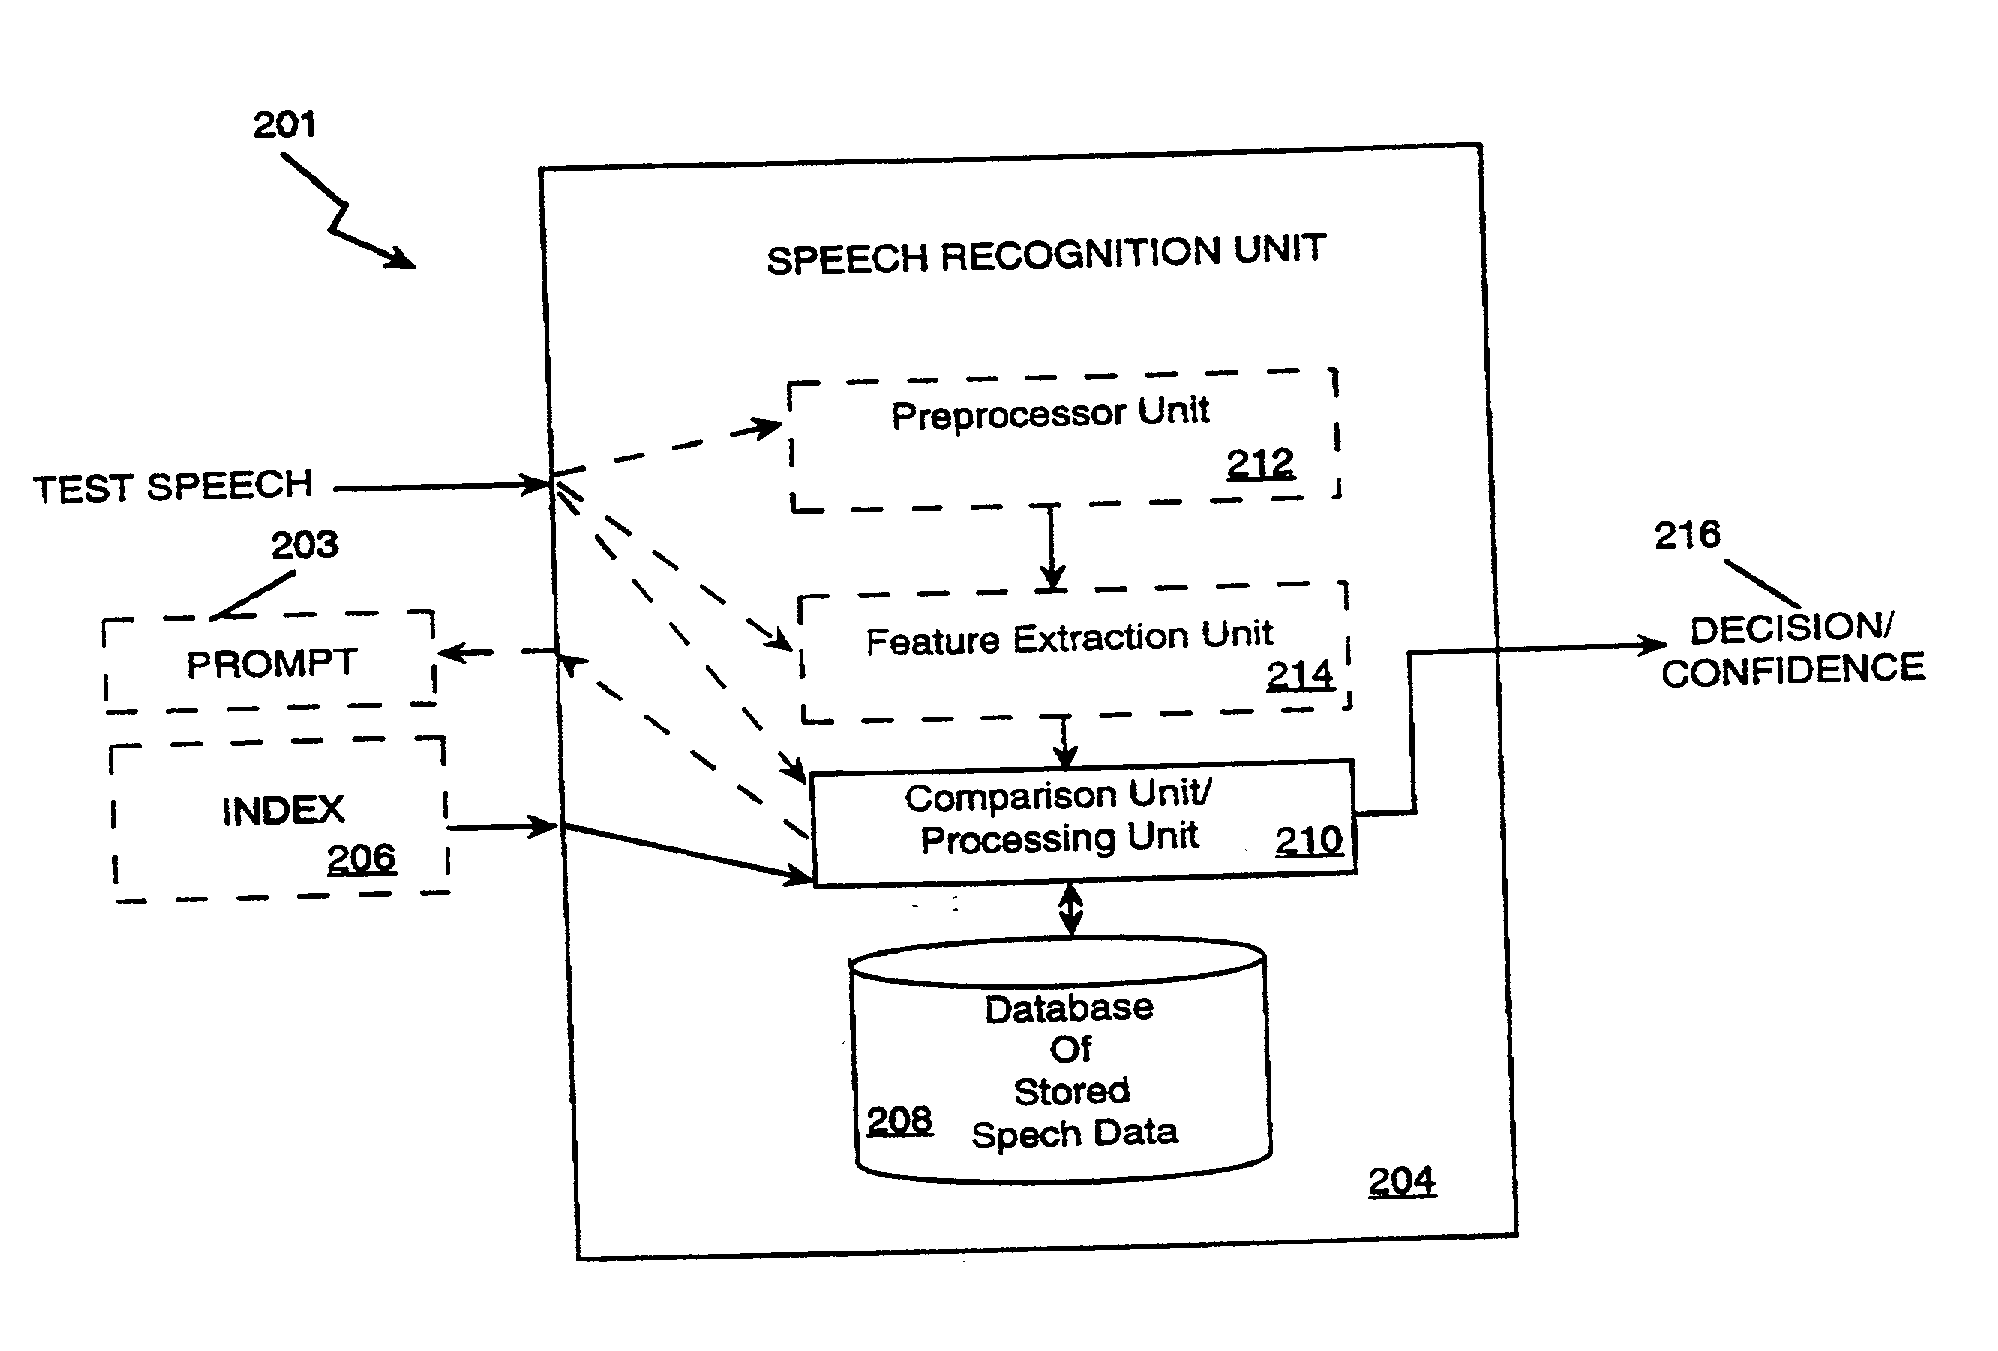 User validation for information system access and transaction processing